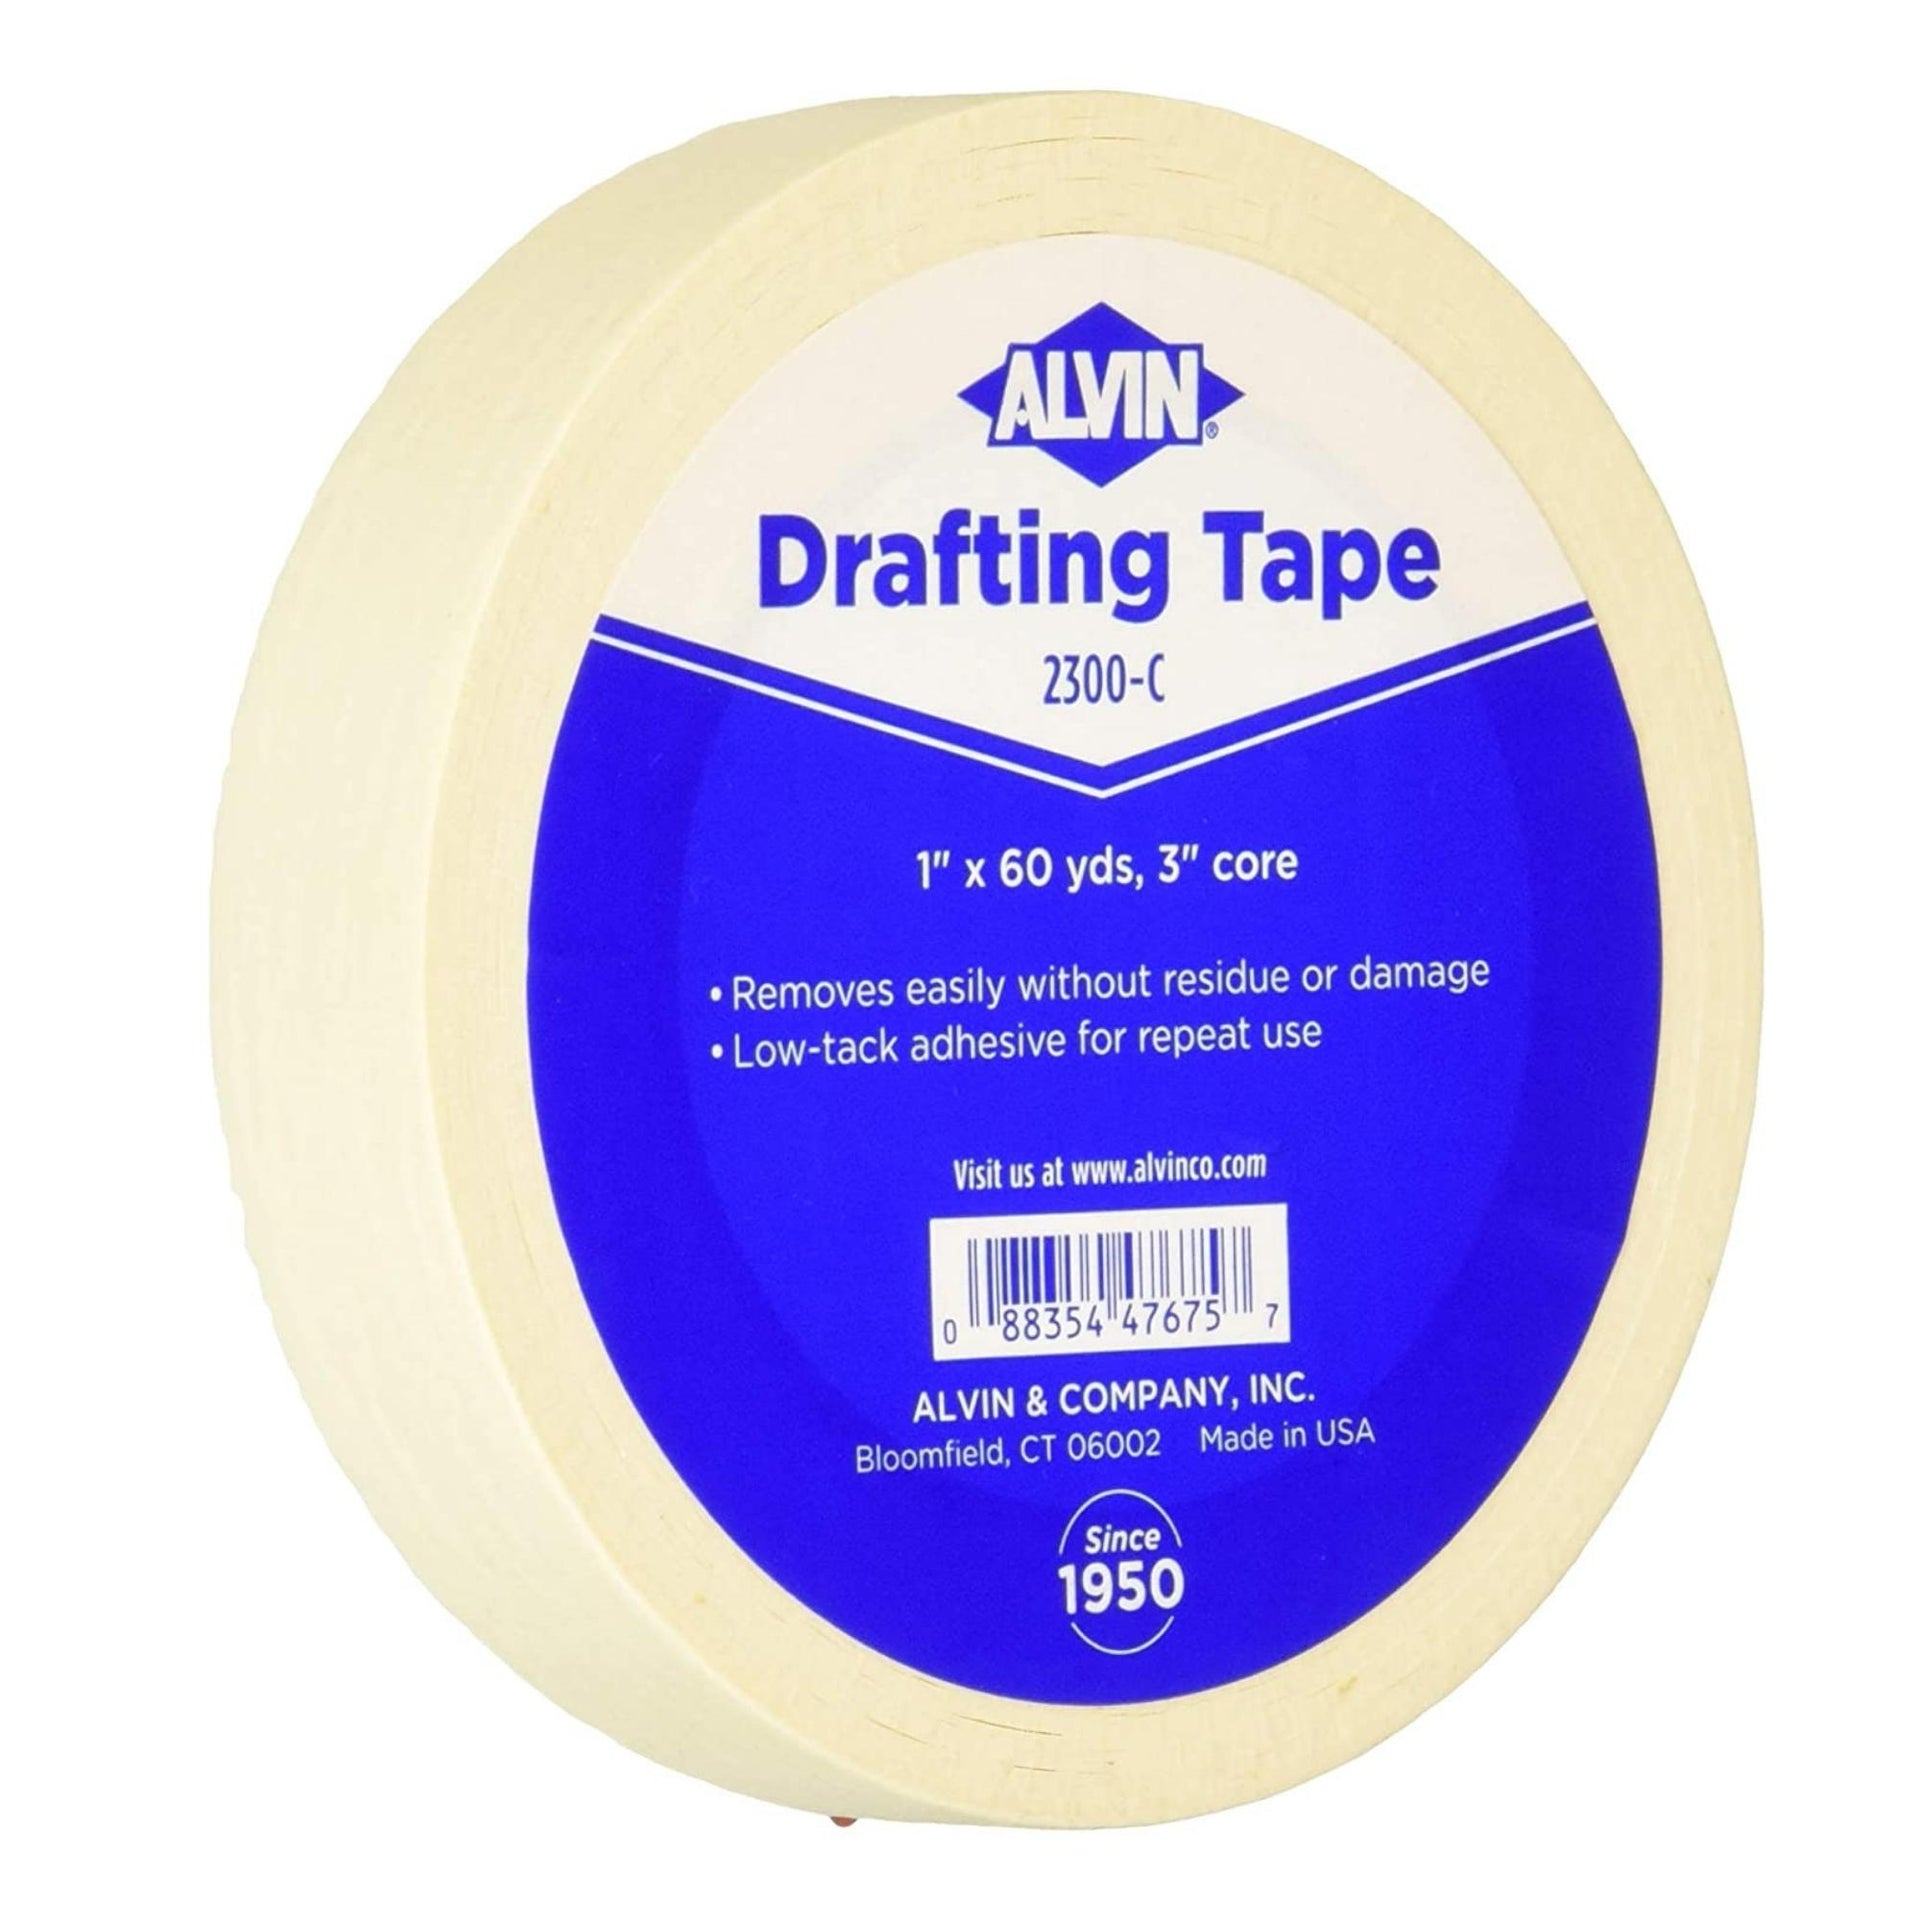 Alvin Double-Sided Tape 1 in. x 25 ft.